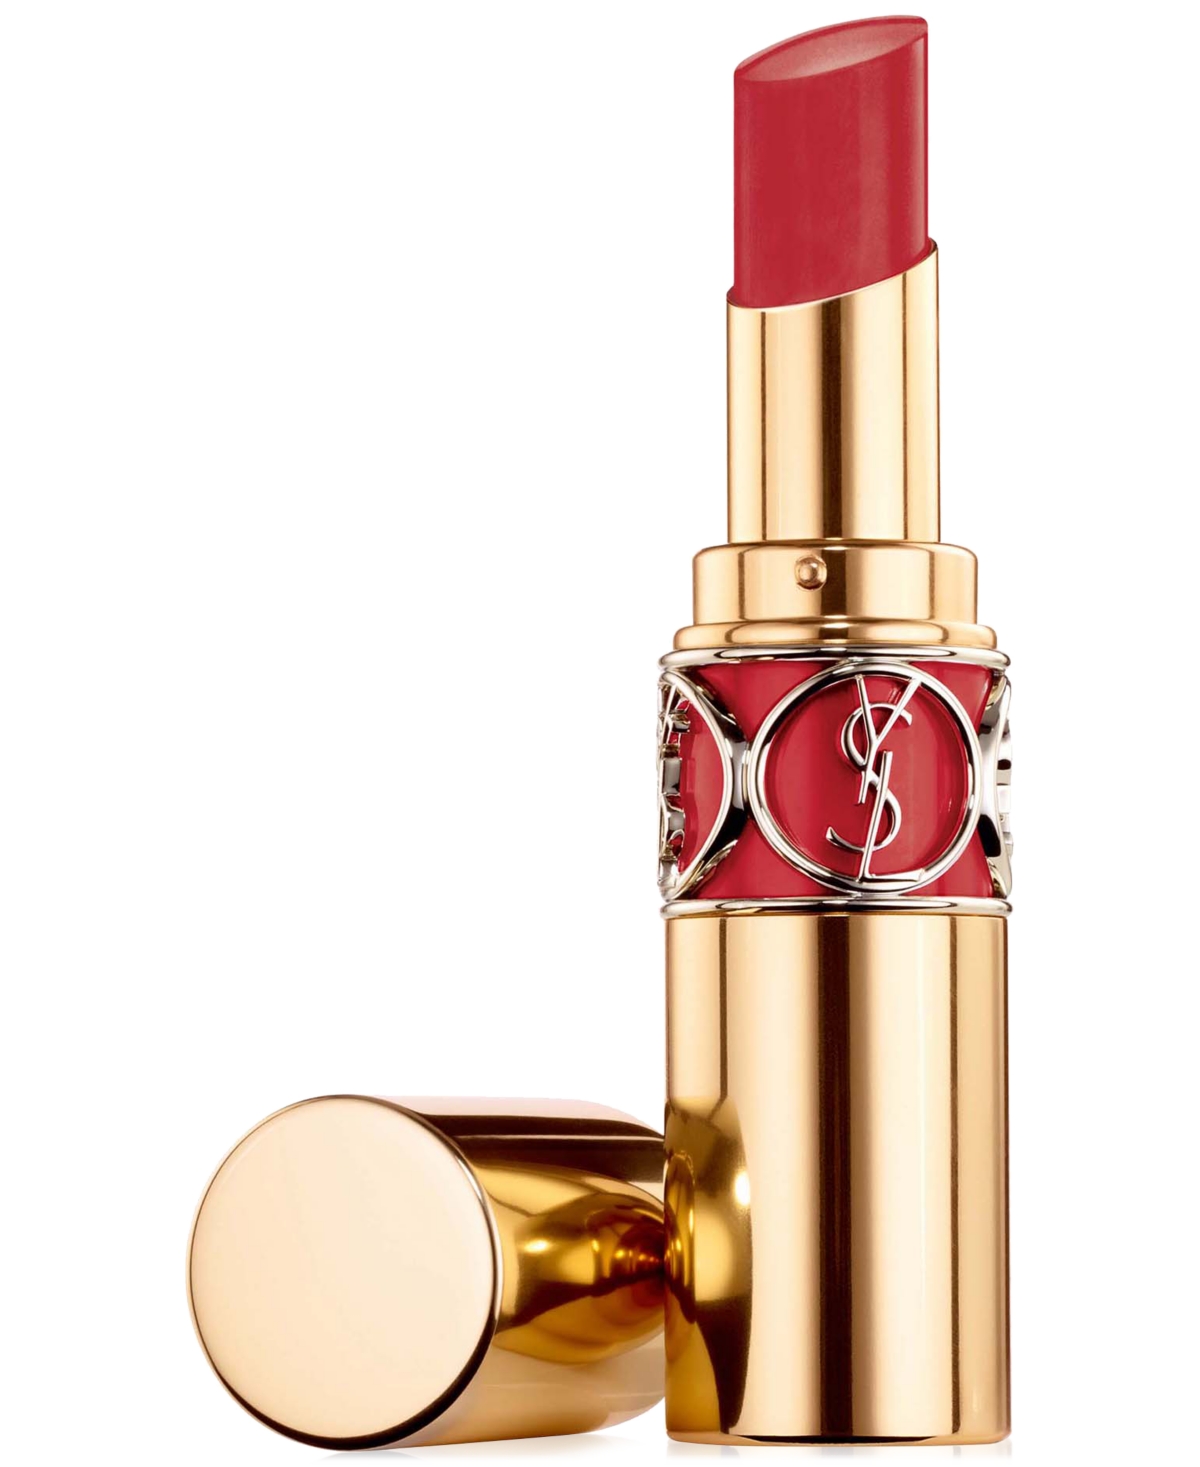 Saint Laurent Rouge Volupte Shine Oil-in-stick Hydrating Lipstick Balm In Rosewood Beat